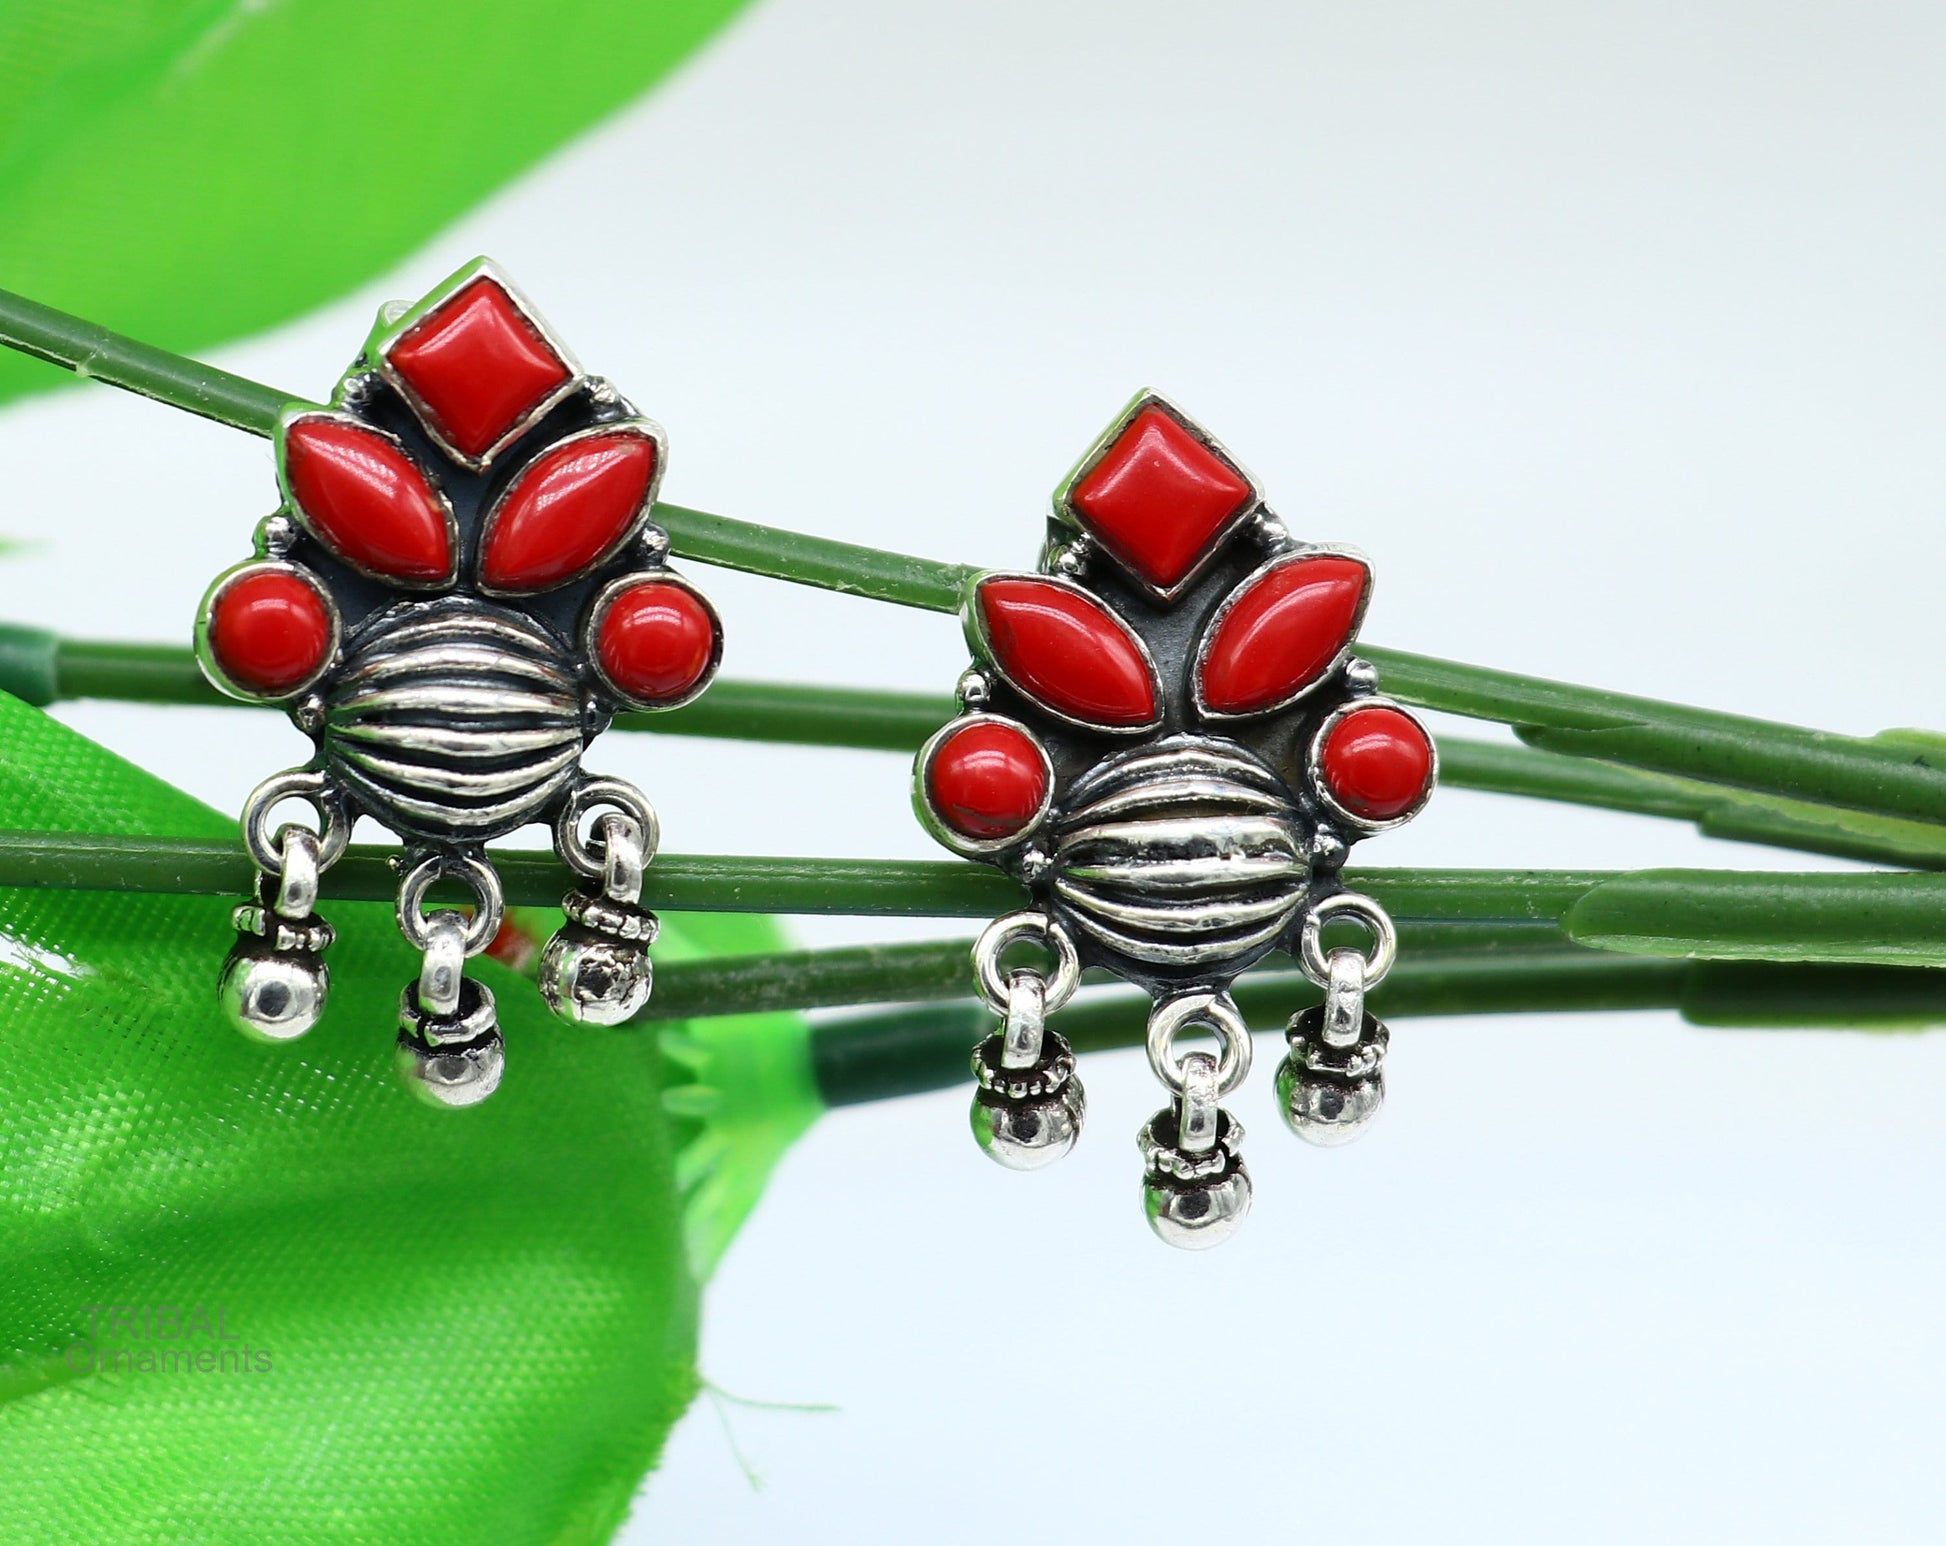 Vintage stylish design customized hanging drops 925 sterling silver stud earring with red coral stone, best bride jewelry s1003 - TRIBAL ORNAMENTS